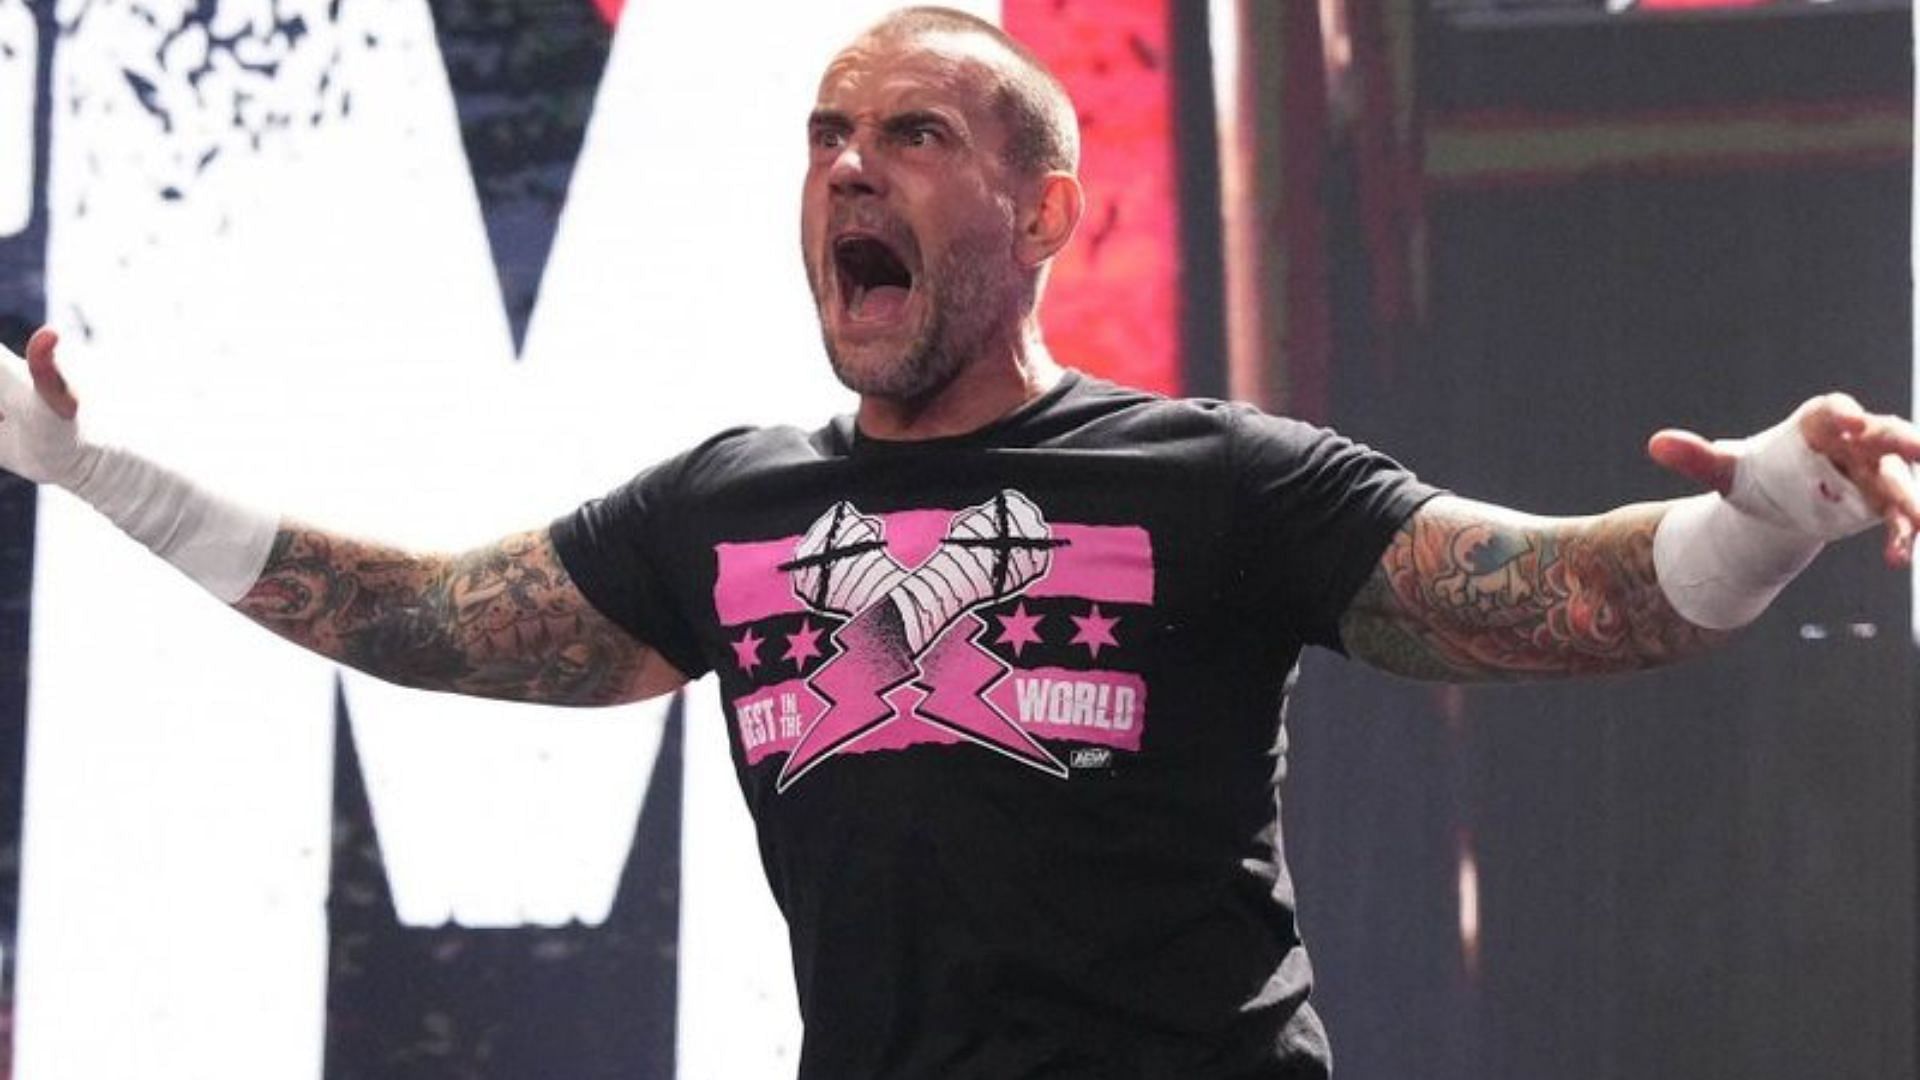 CM Punk during his entrance. Image Credits: Twitter - @AEW